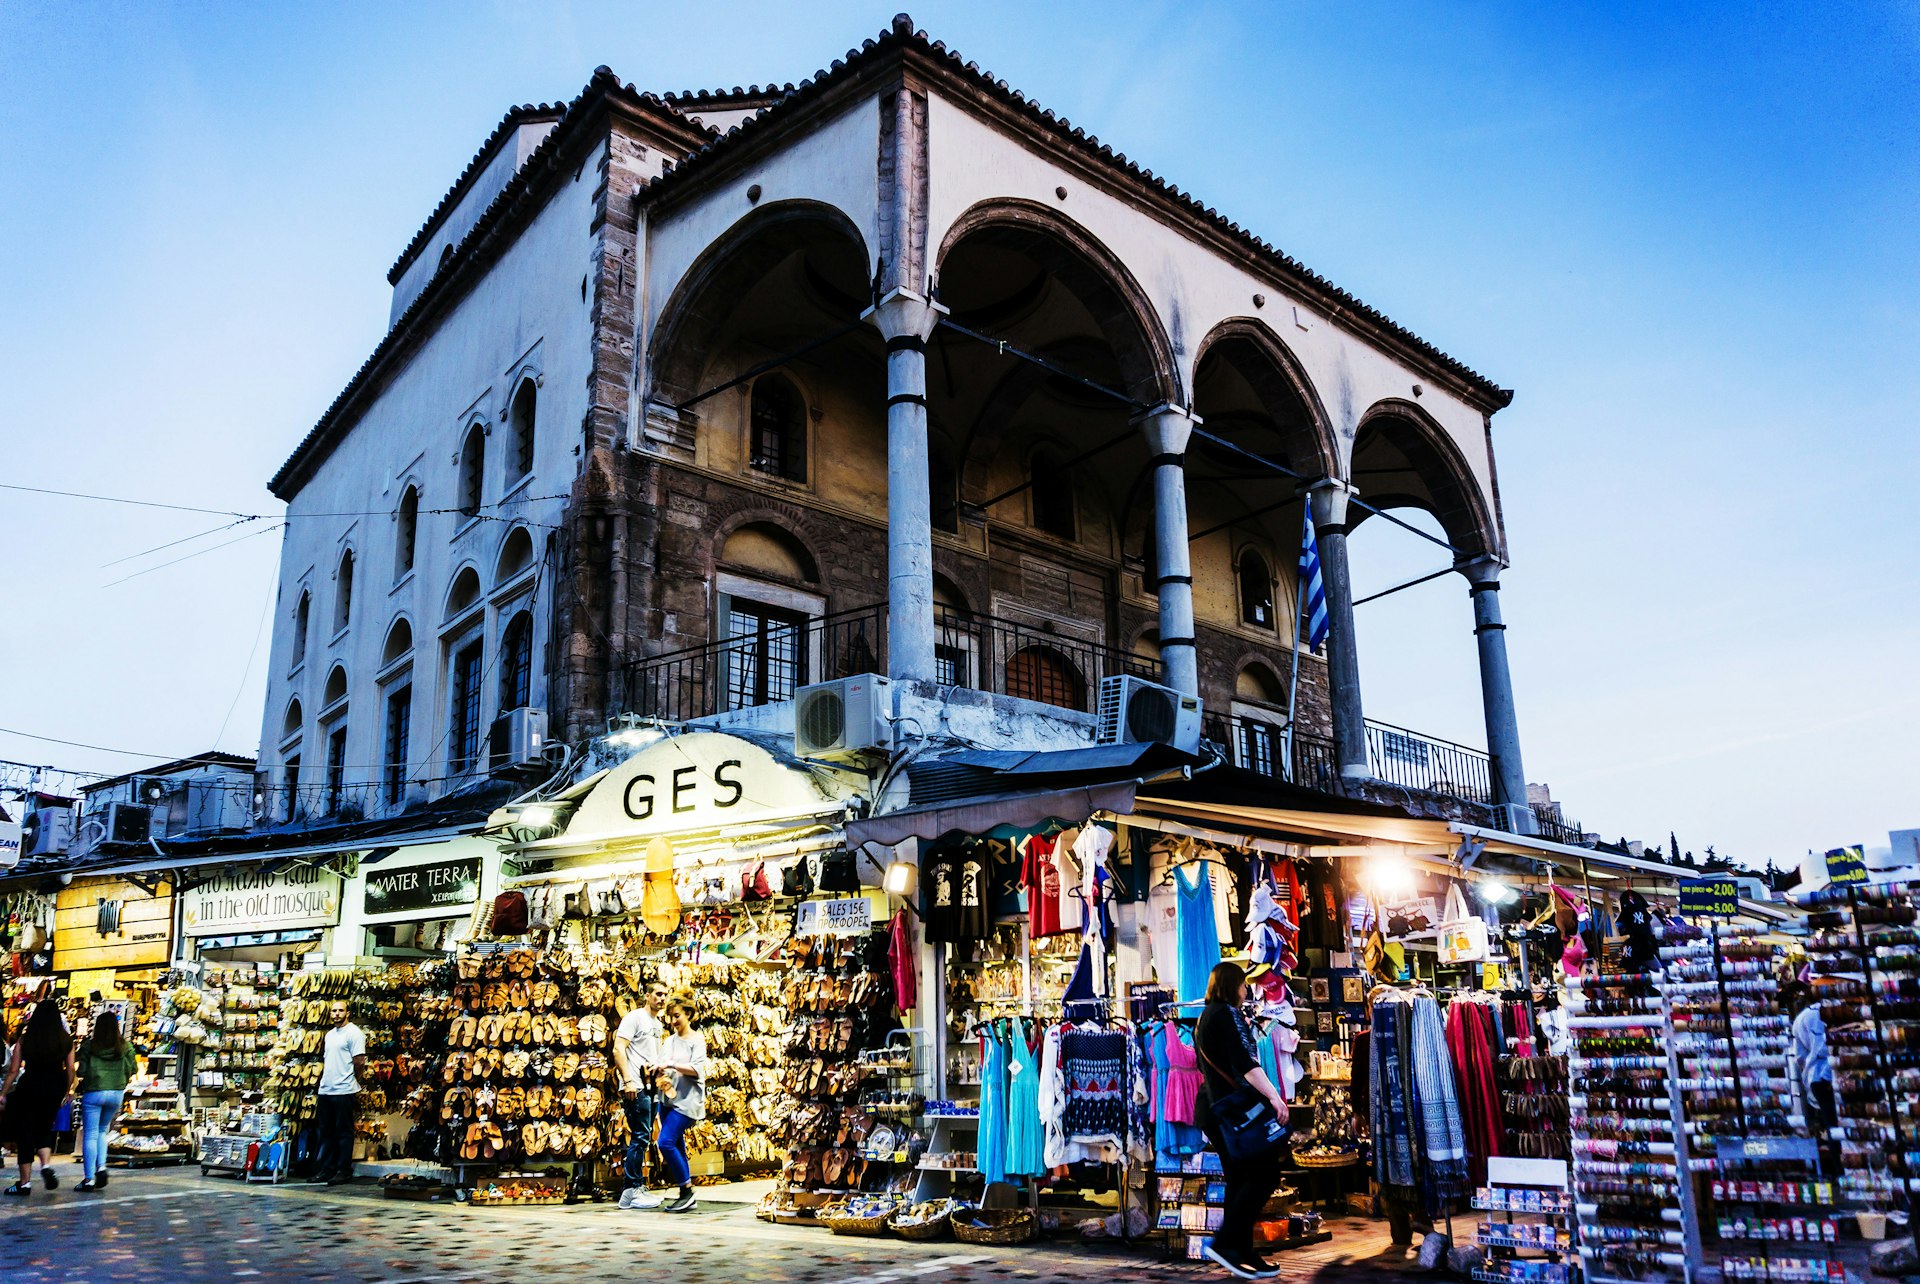 The Monastiraki Flea Market during the early evening in Athens with stalls and stores still open and a domed building in the background.